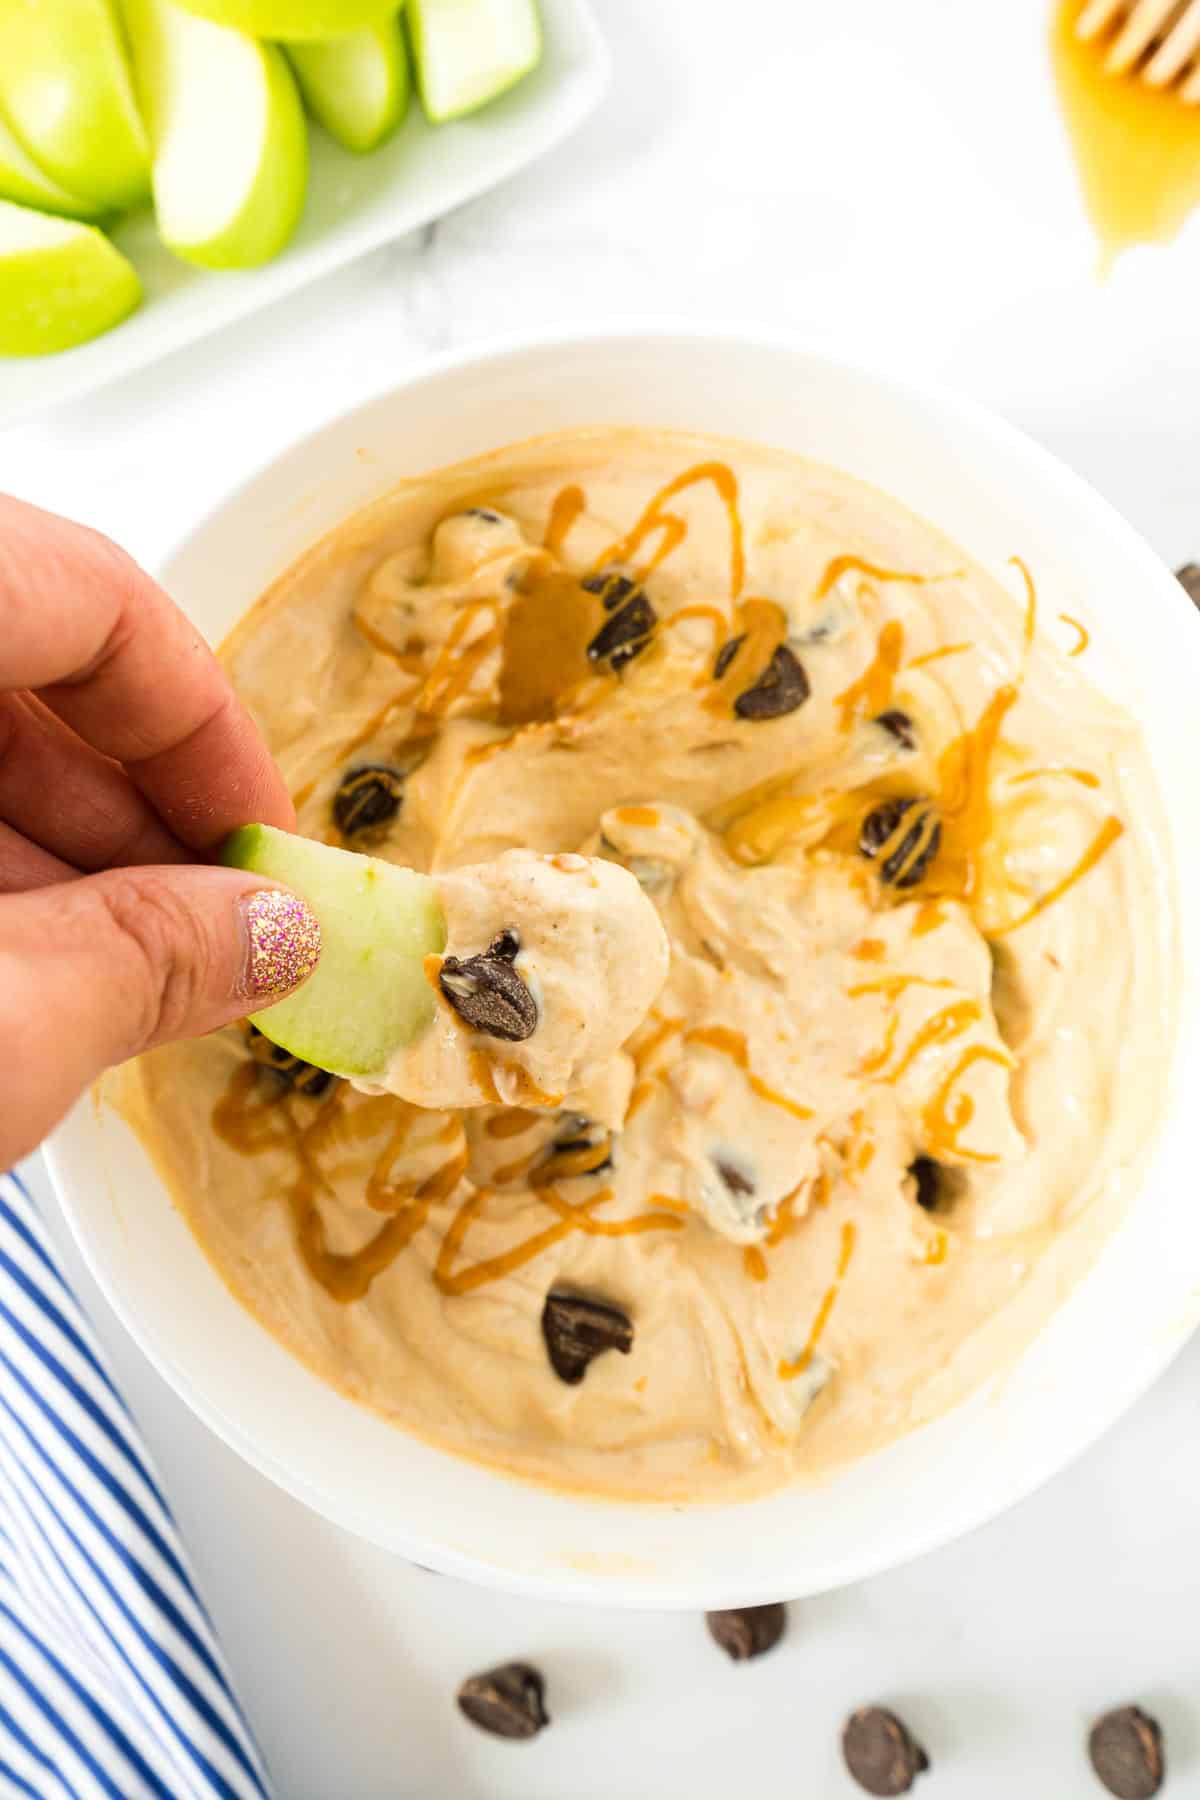 A green apple being dipped in this Cookie Dough Greek Yogurt.